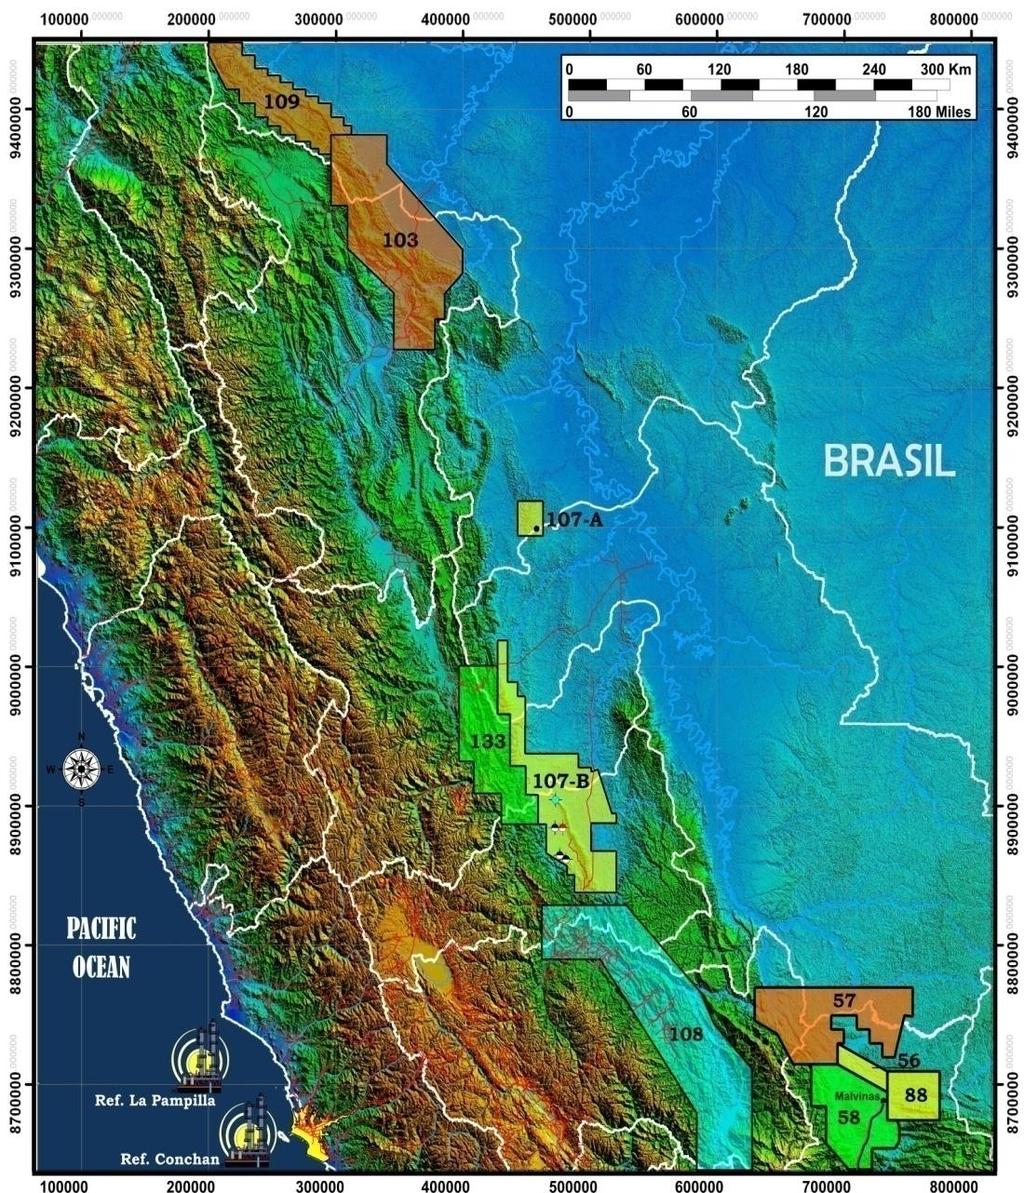 14 Central Peru Foldbelt Oil The Peruvian Foldbelt is largely under explored with a very low well density due to logistical challenges.